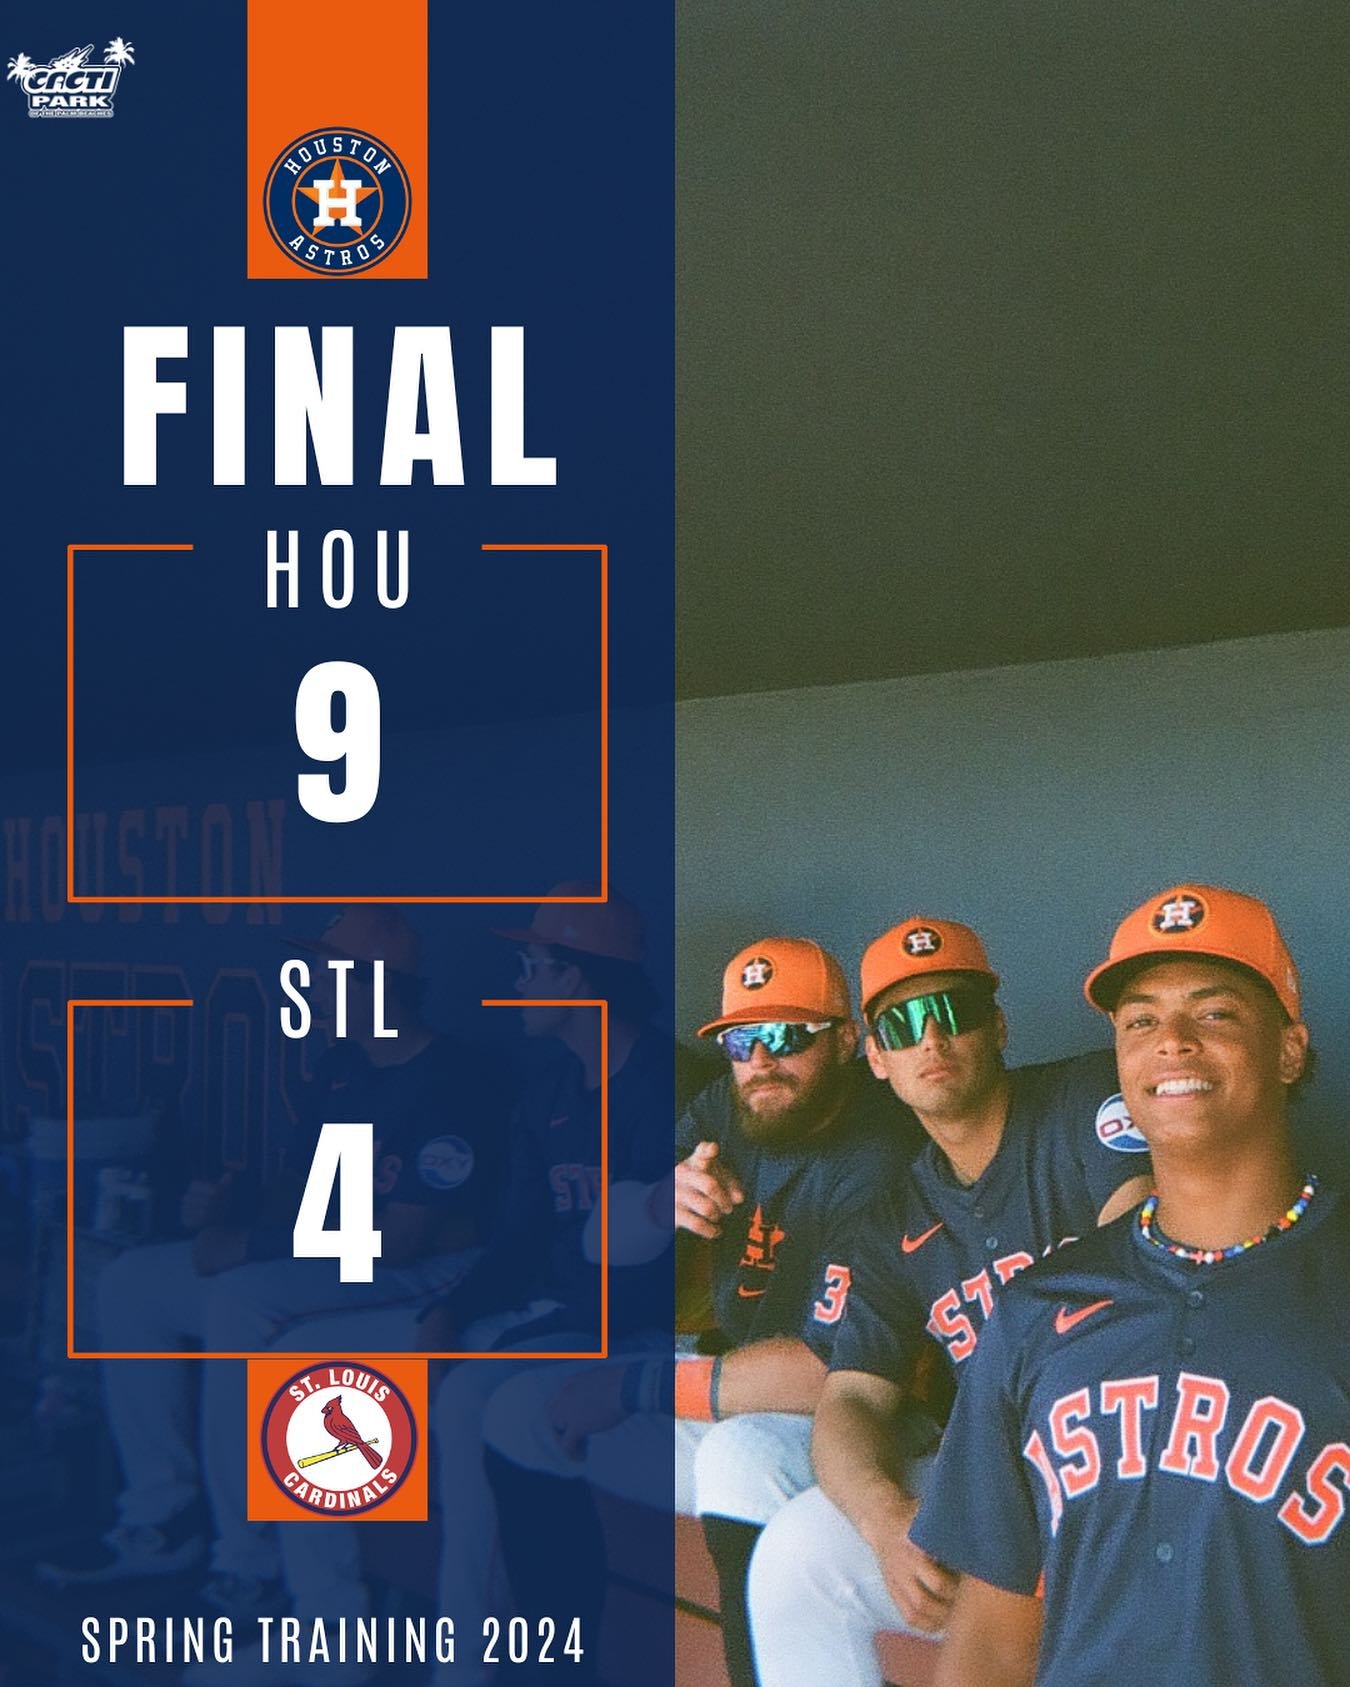 The Astros are going BACK to h-town with a WIN! ⚾️☀️✅

#Astros #SpringTraining #Houston